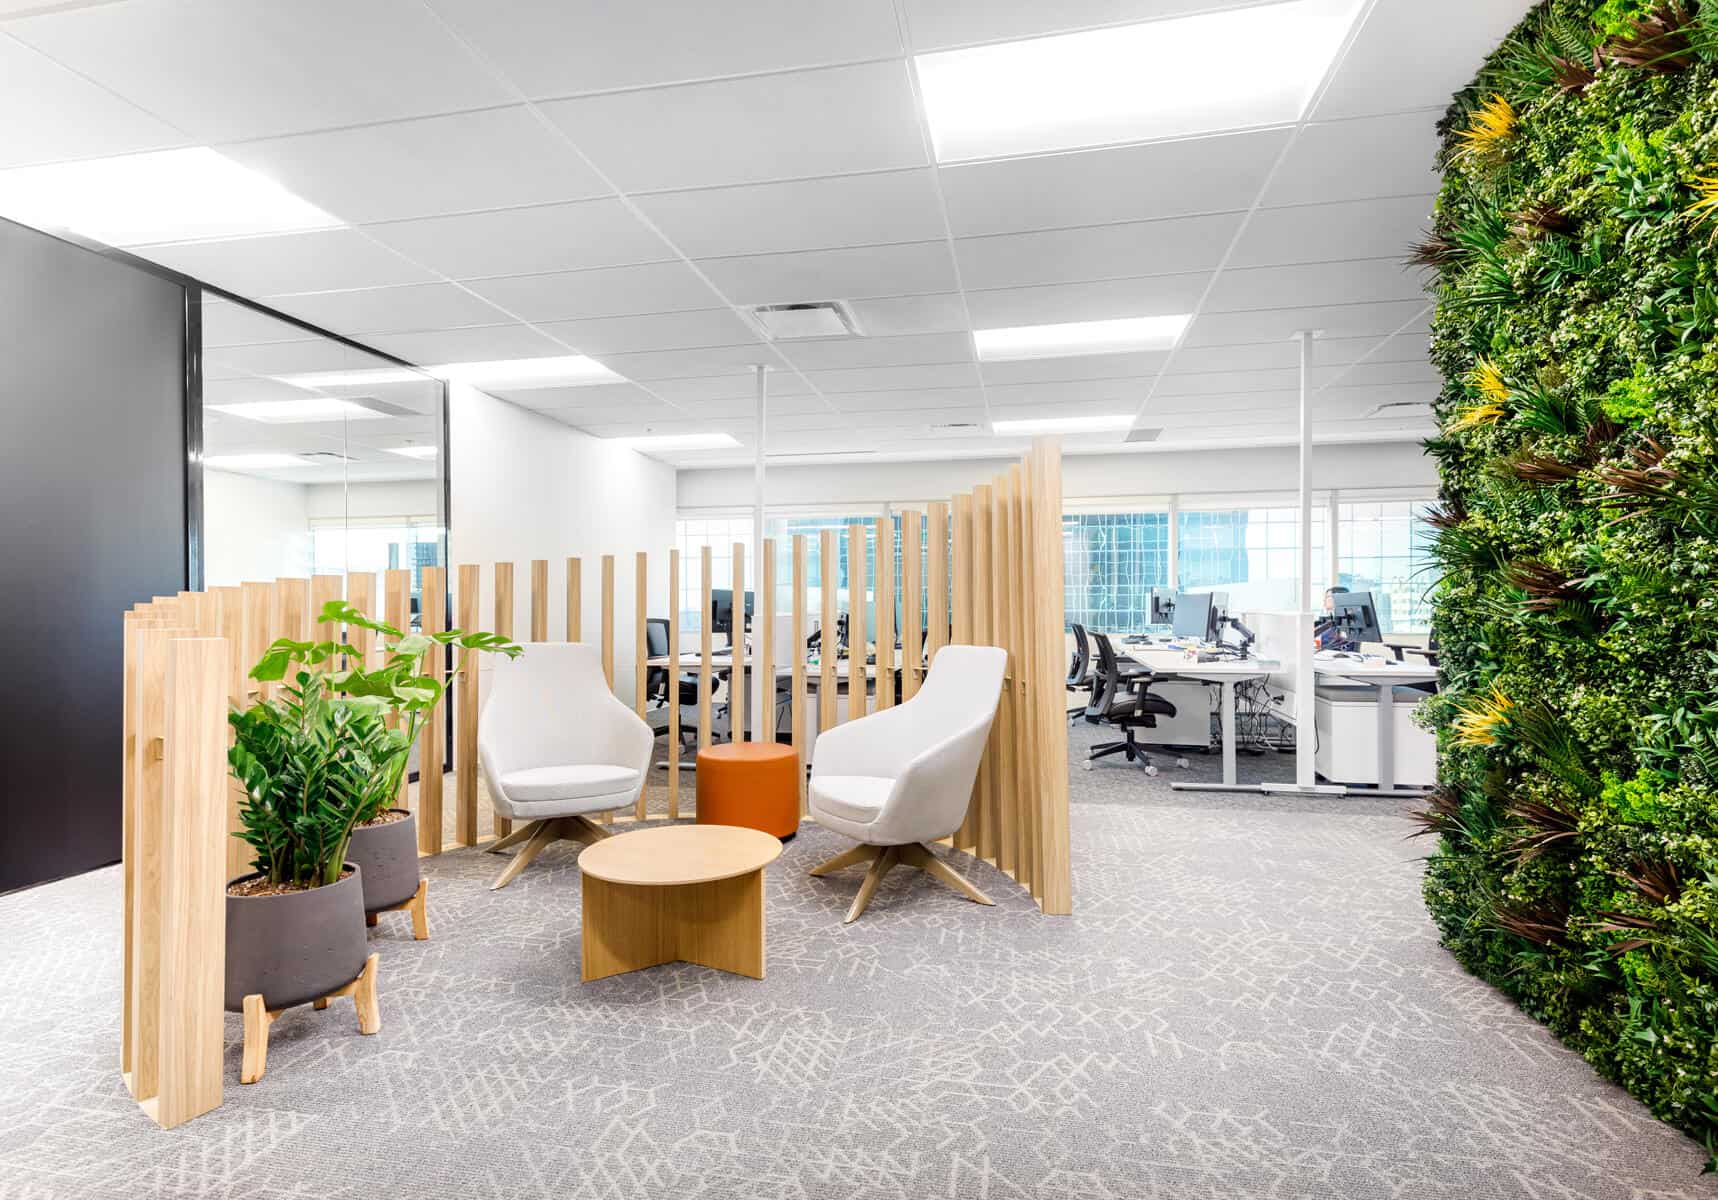 Office renovation featuring a modern interior with a seating area that includes white chairs, wooden partitions, a green living wall, and desks with computers in the background.